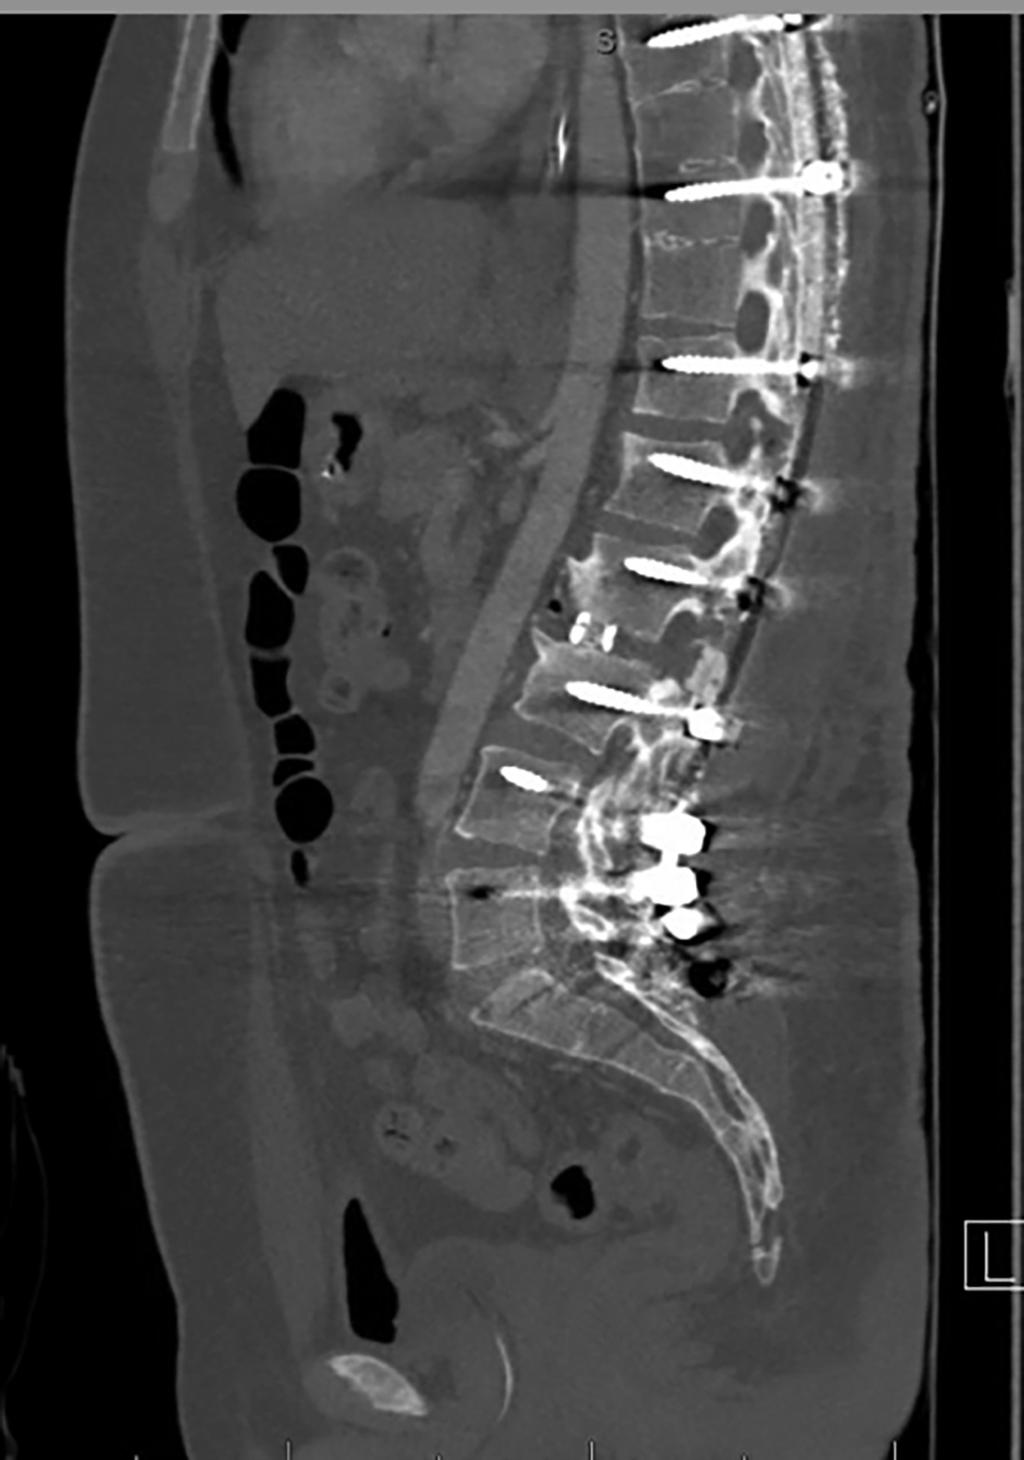 FIGURE 5: Postoperative Sagittal CT Image Immediate postoperative sagittal CT image demonstrating satisfactory placement of hardware, and complete correction of kyphotic deformity using Ponte